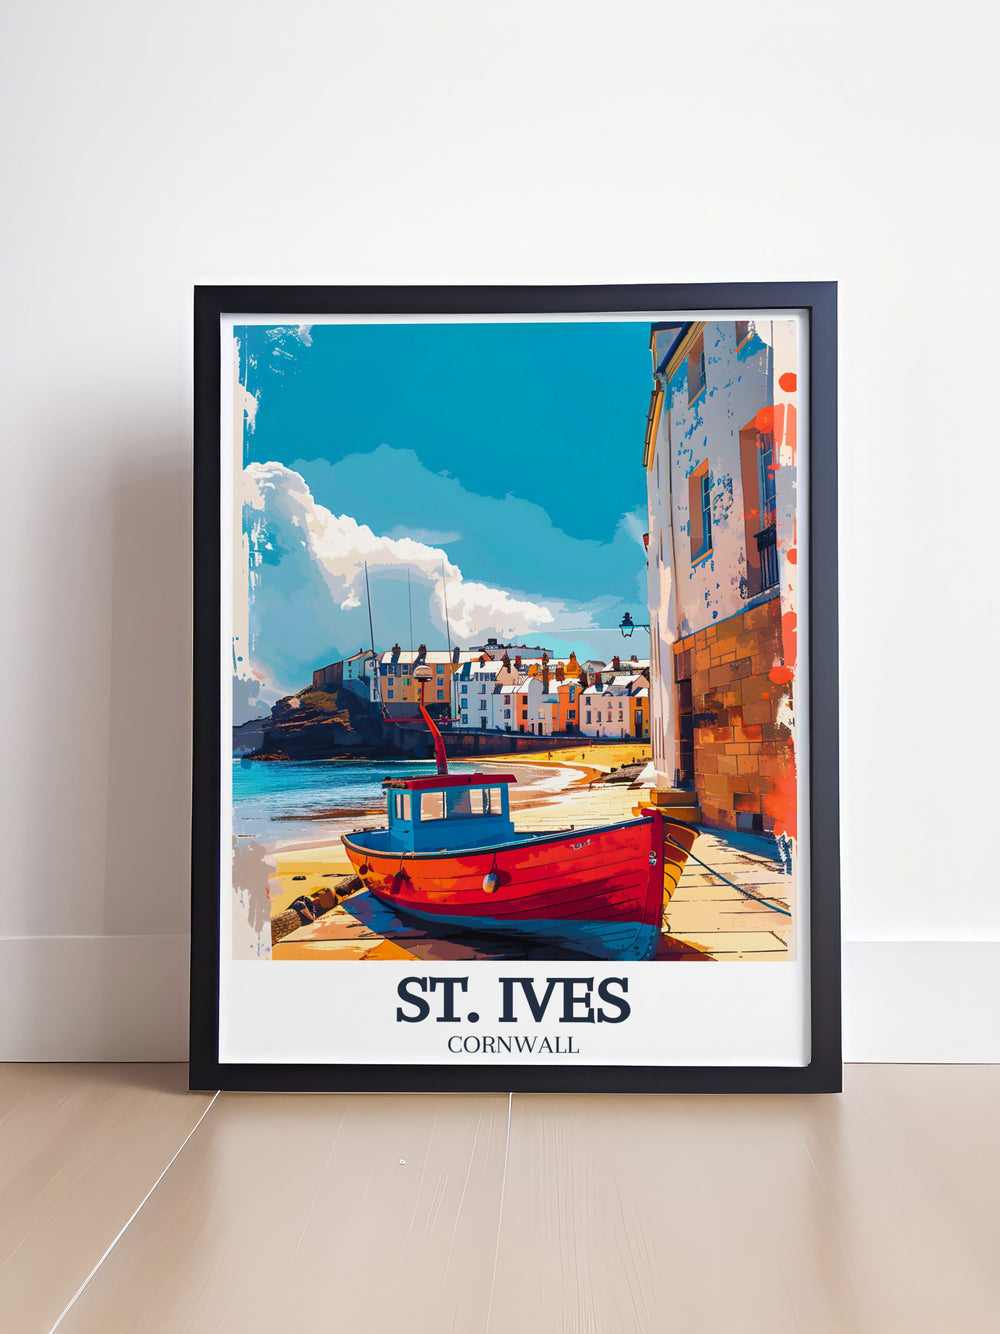 Explore the charming blend of history and coastal beauty in St. Ives and Porthmeor Beach with this detailed travel poster, celebrating Cornwalls iconic destination.